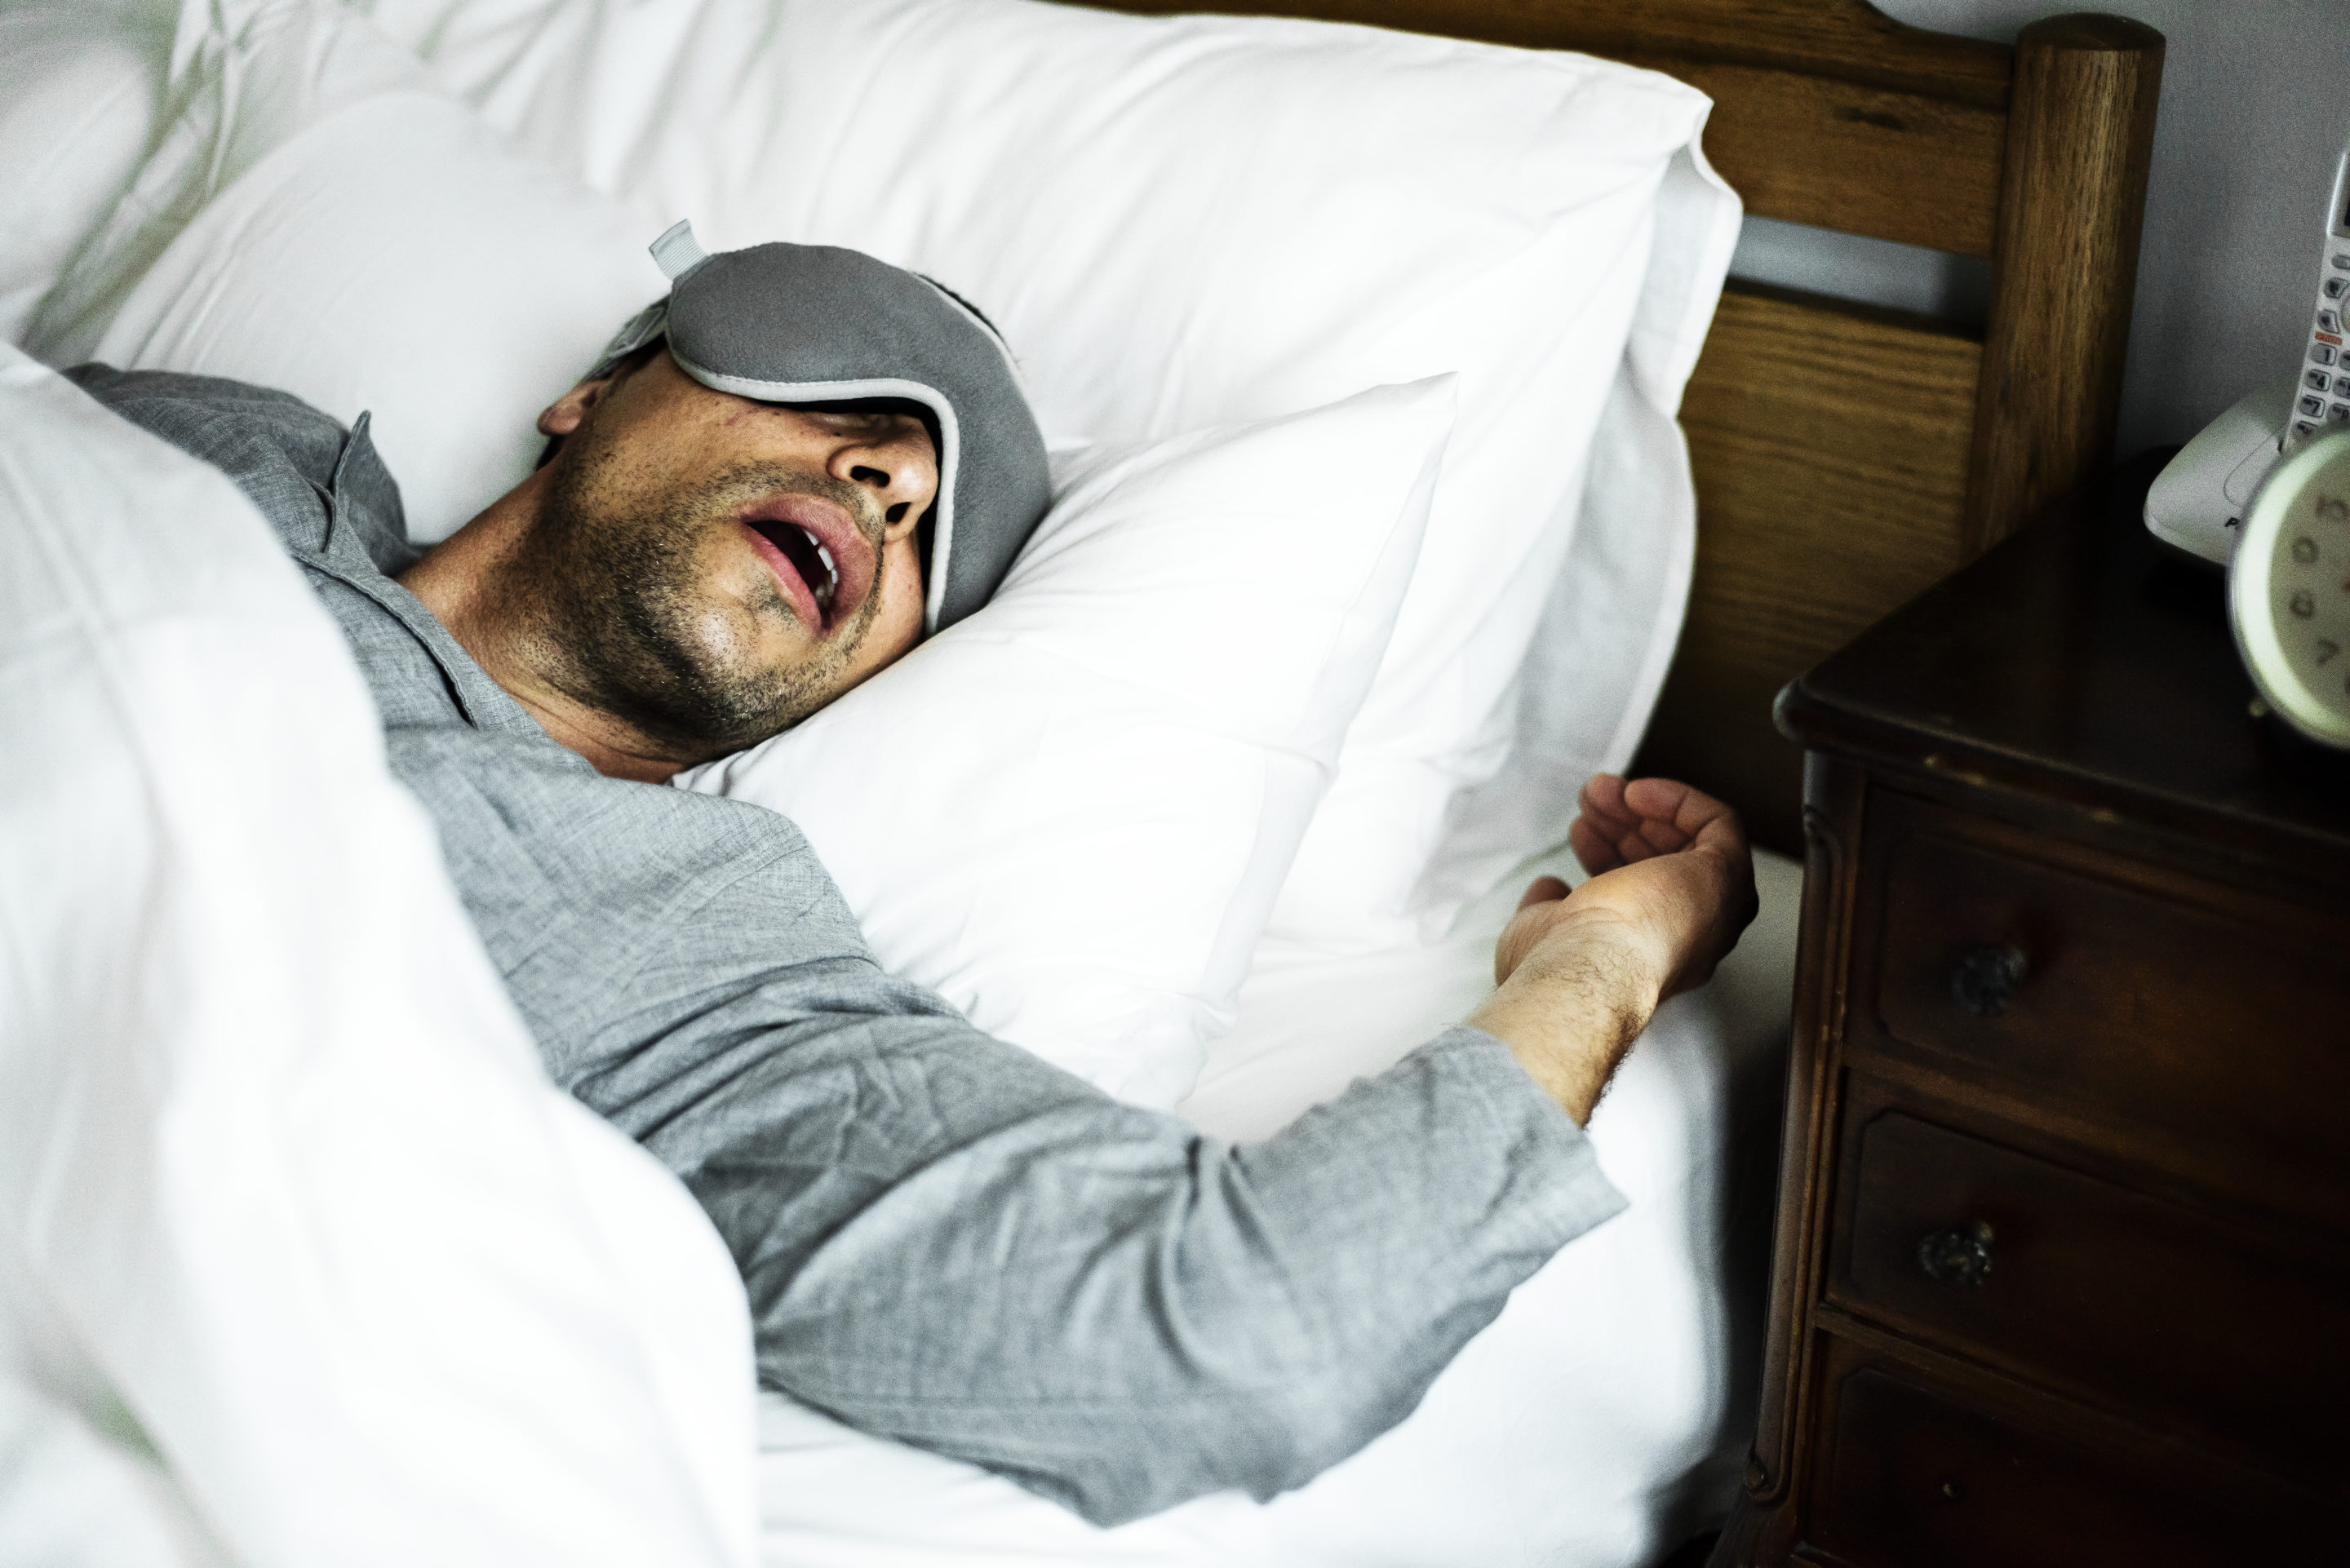 A man with sleep apnea snoring loudly while asleep in bed.